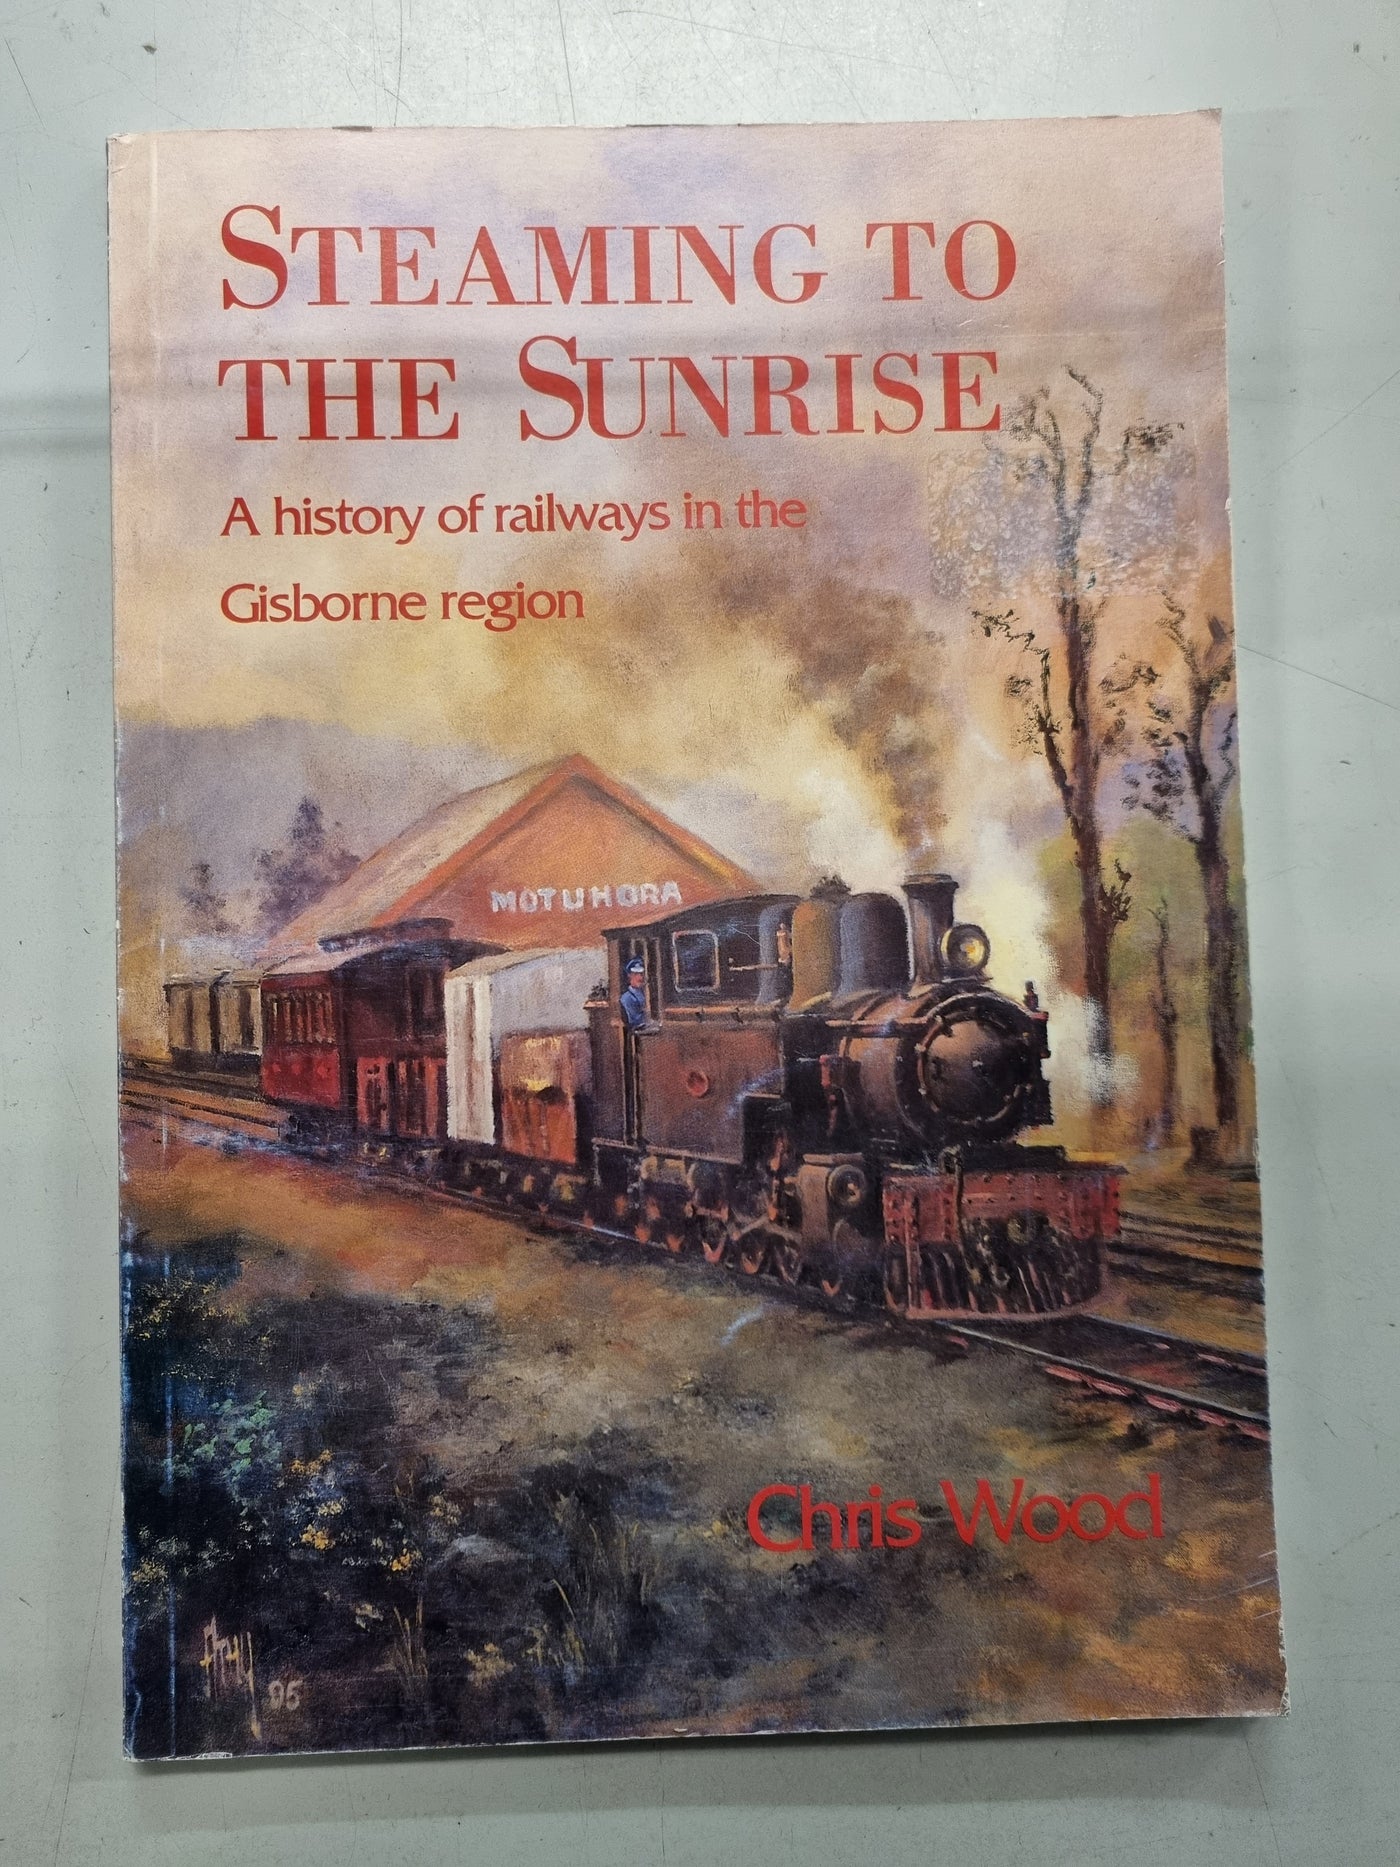 Steaming to the Sunrise: a History of Railways in the Gisborne Region